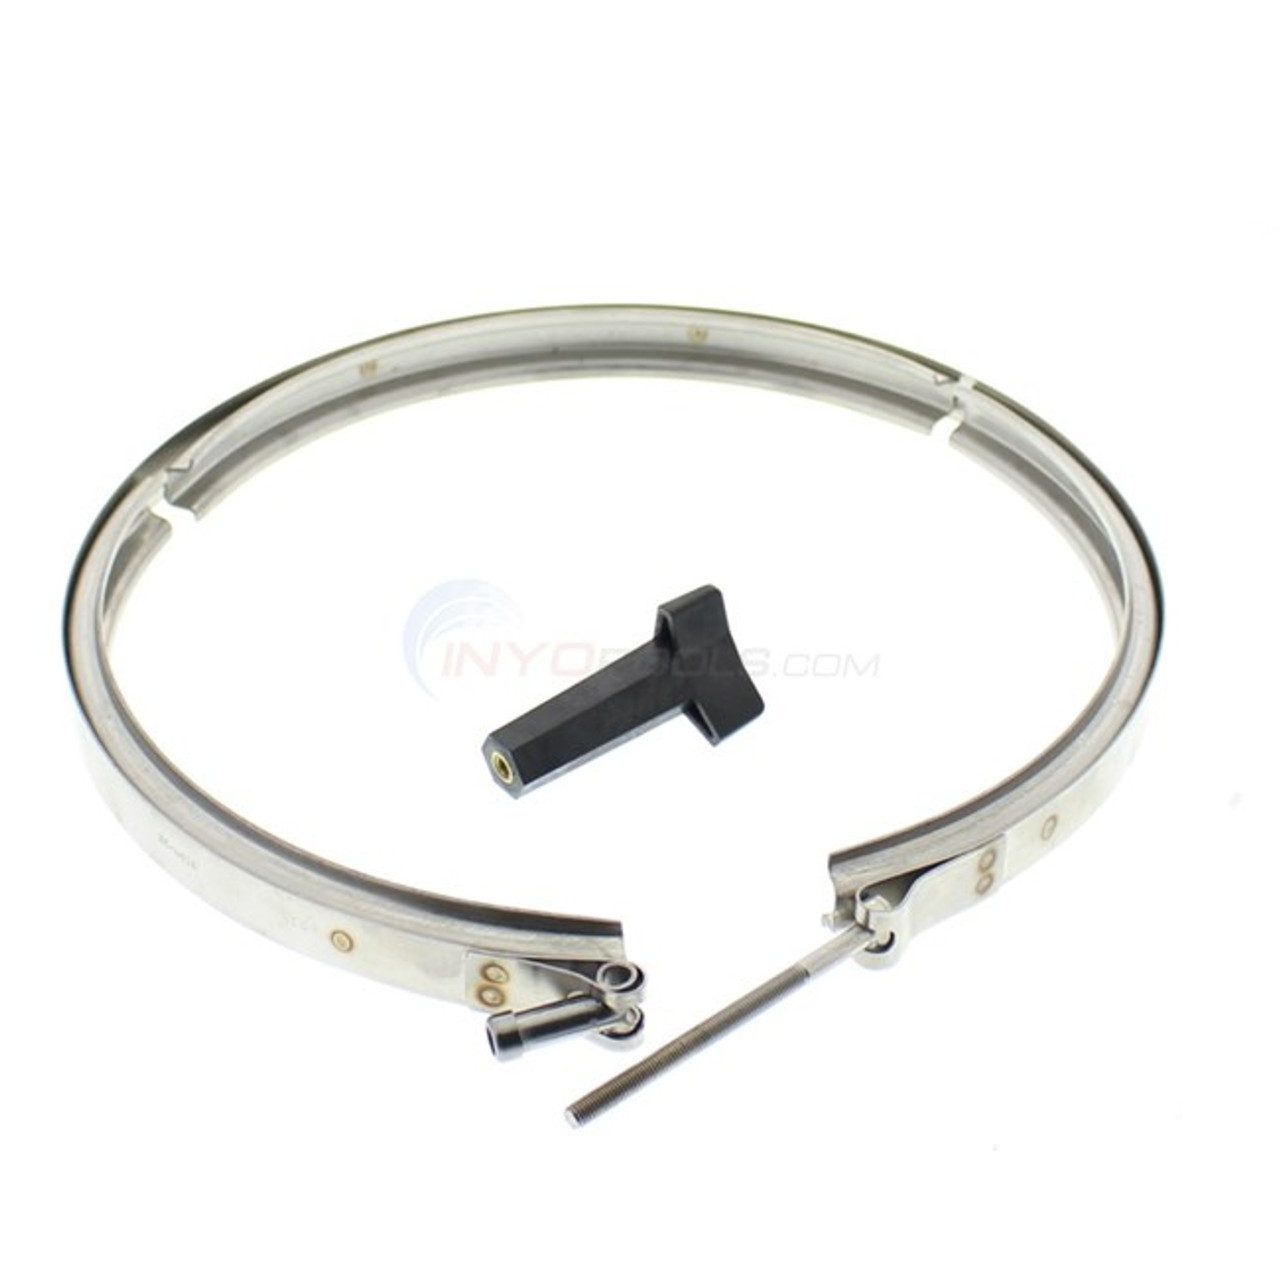 Pentair Challenger Clamp Band Assembly, 355320